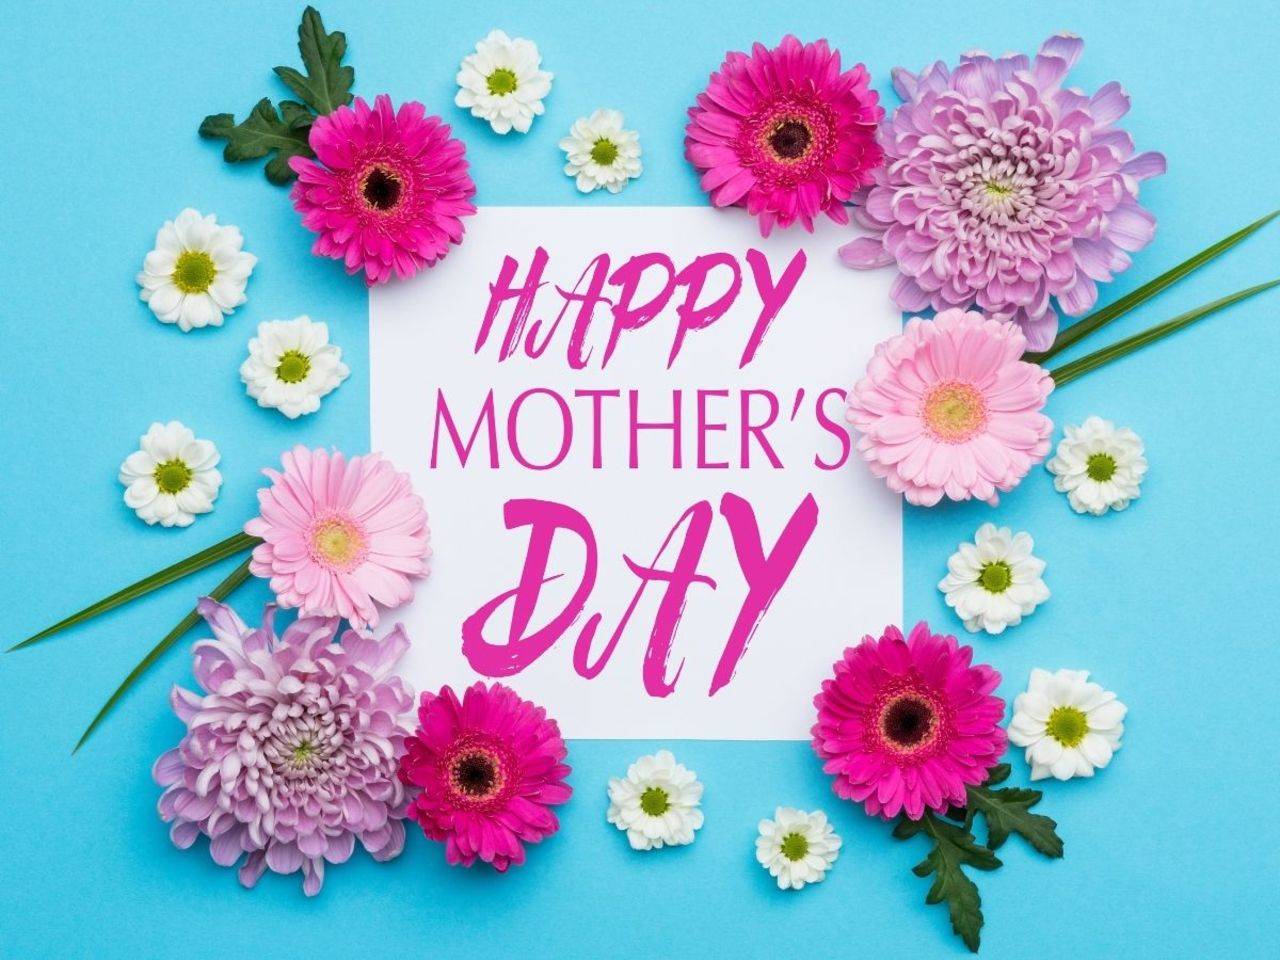 Happy Mother's Day 2022: Images, Wishes, Messages, Quotes ...